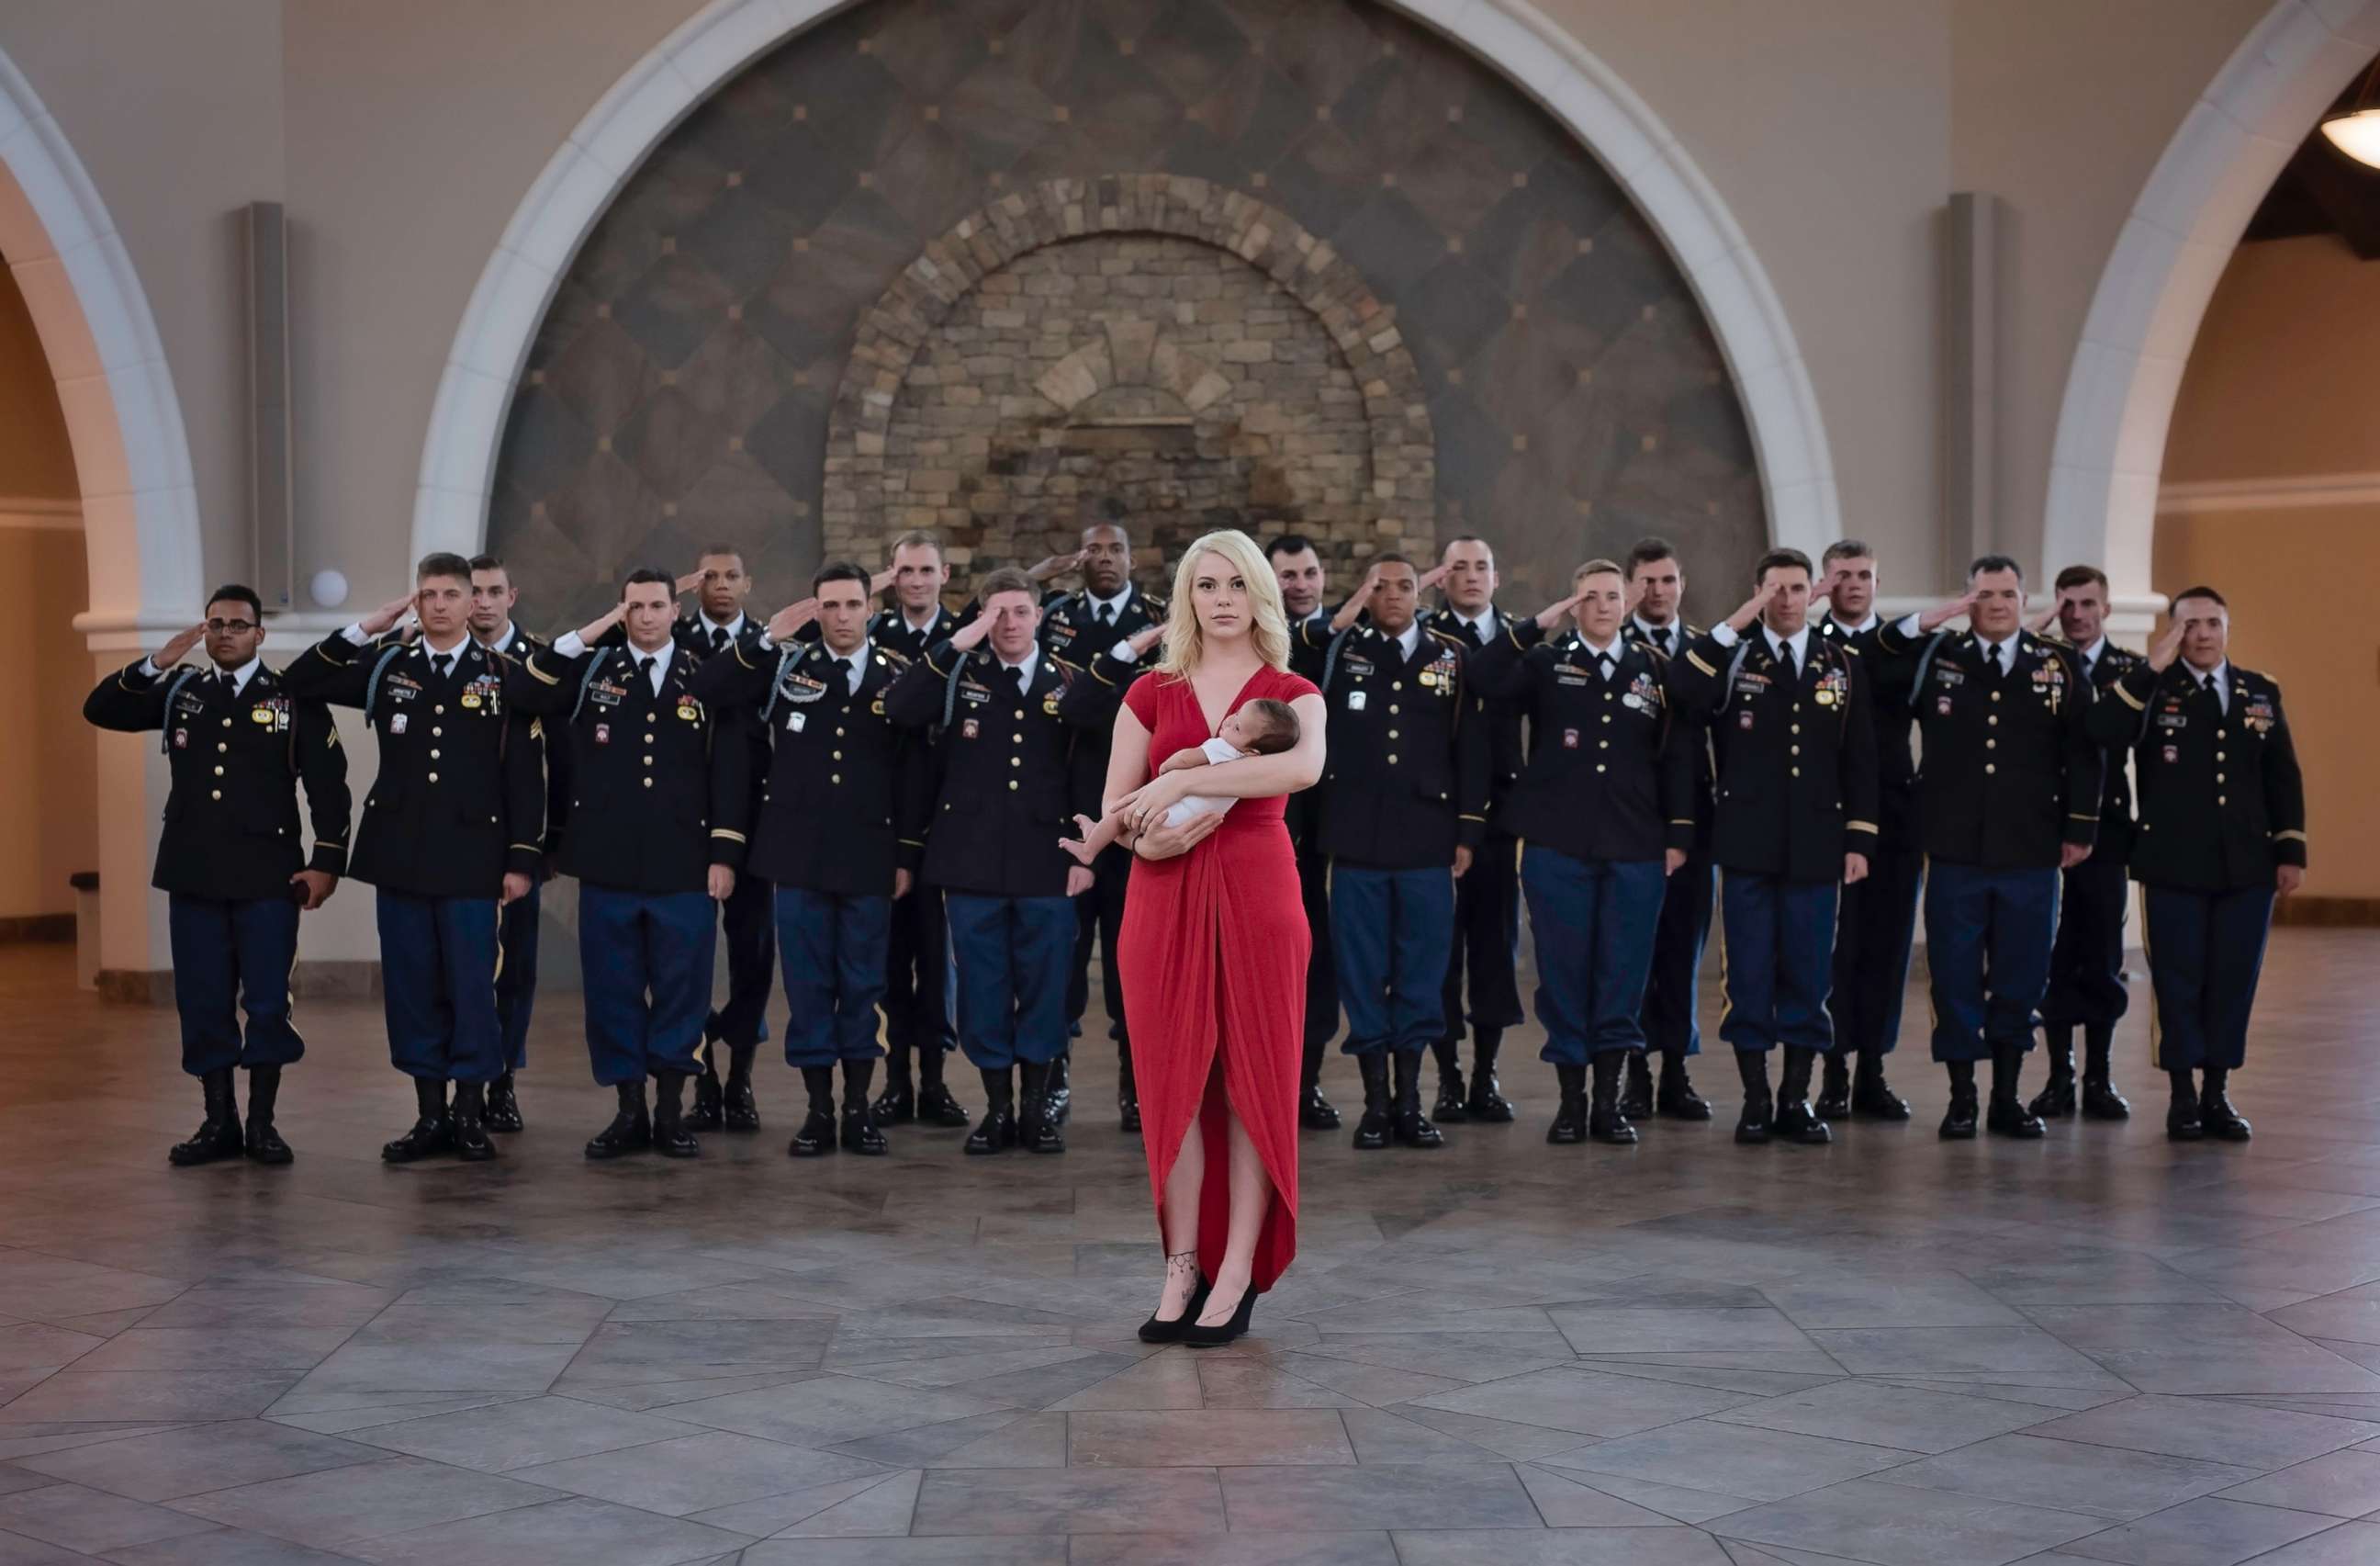 PHOTO: Christian Harris, the daughter of Army Specialist Chris Harris who was killed last year, took part in a special photo shoot with some of Harris' former comrades and her mother, Britt Harris.